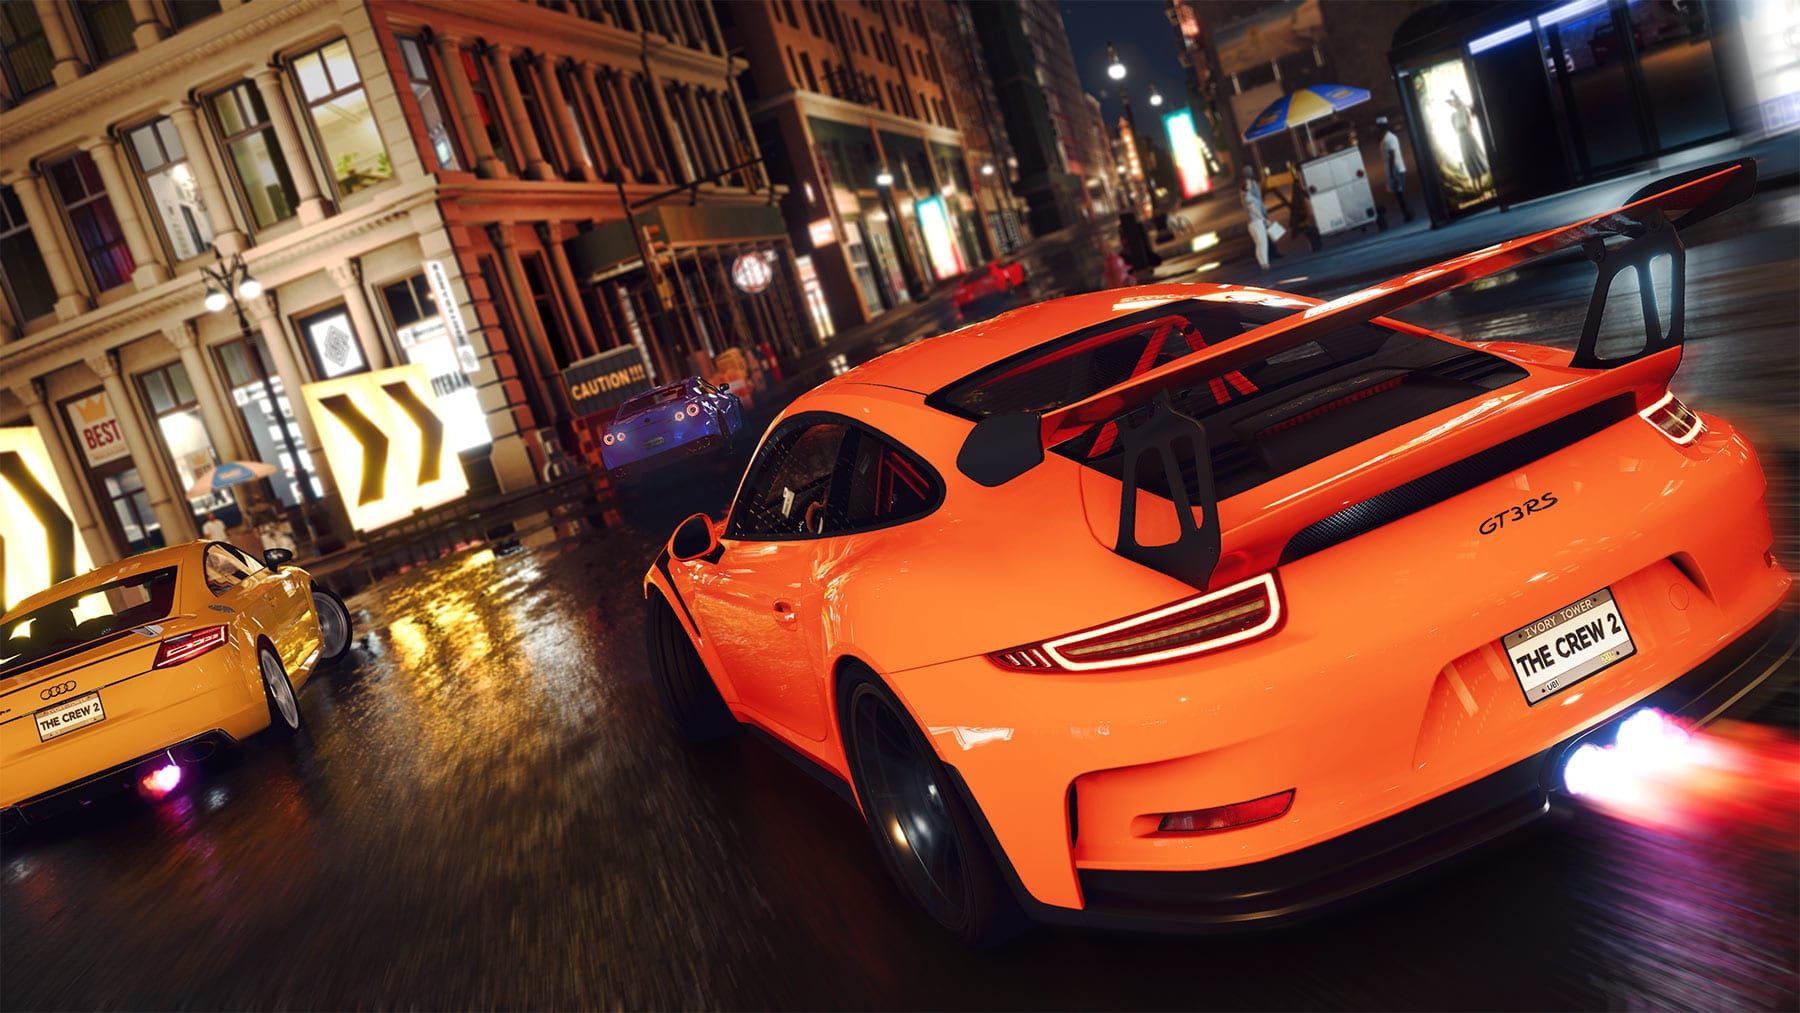 The Crew 2 gets a release date